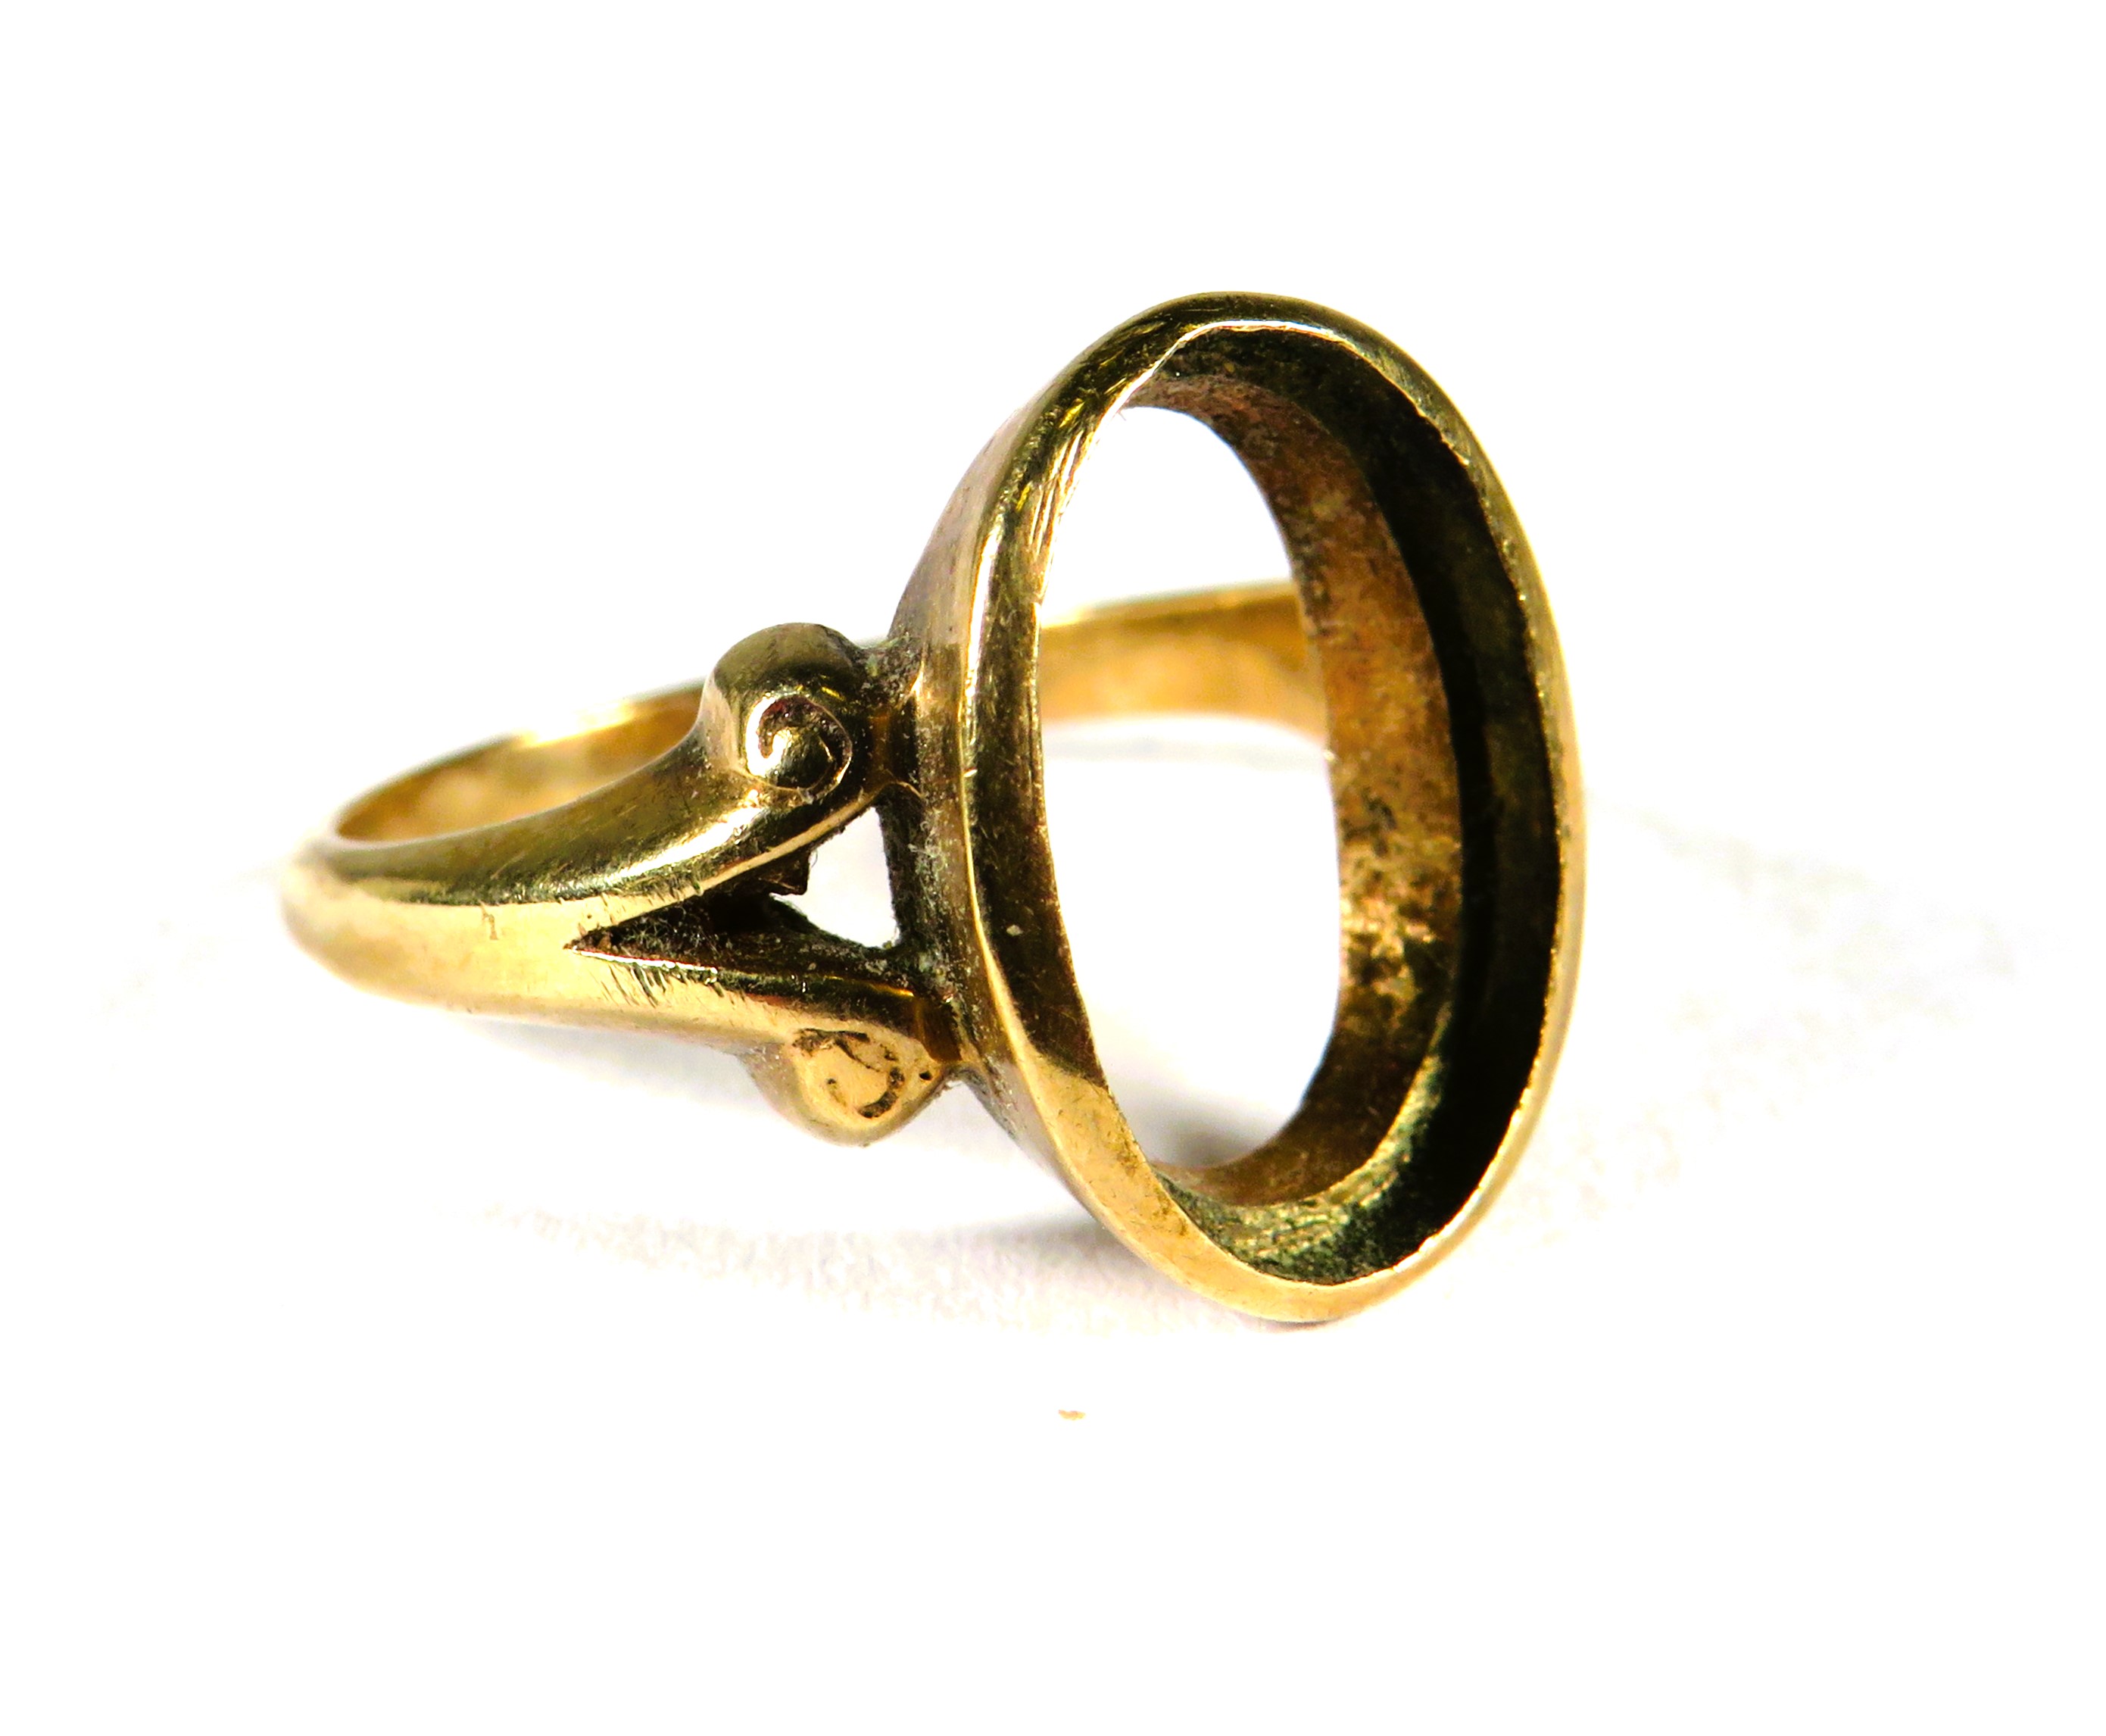 9ct Yellow Gold ring with Vacant mount, suitable for jeweller or project. Finger size 'N-5'  3.5g - Image 2 of 3